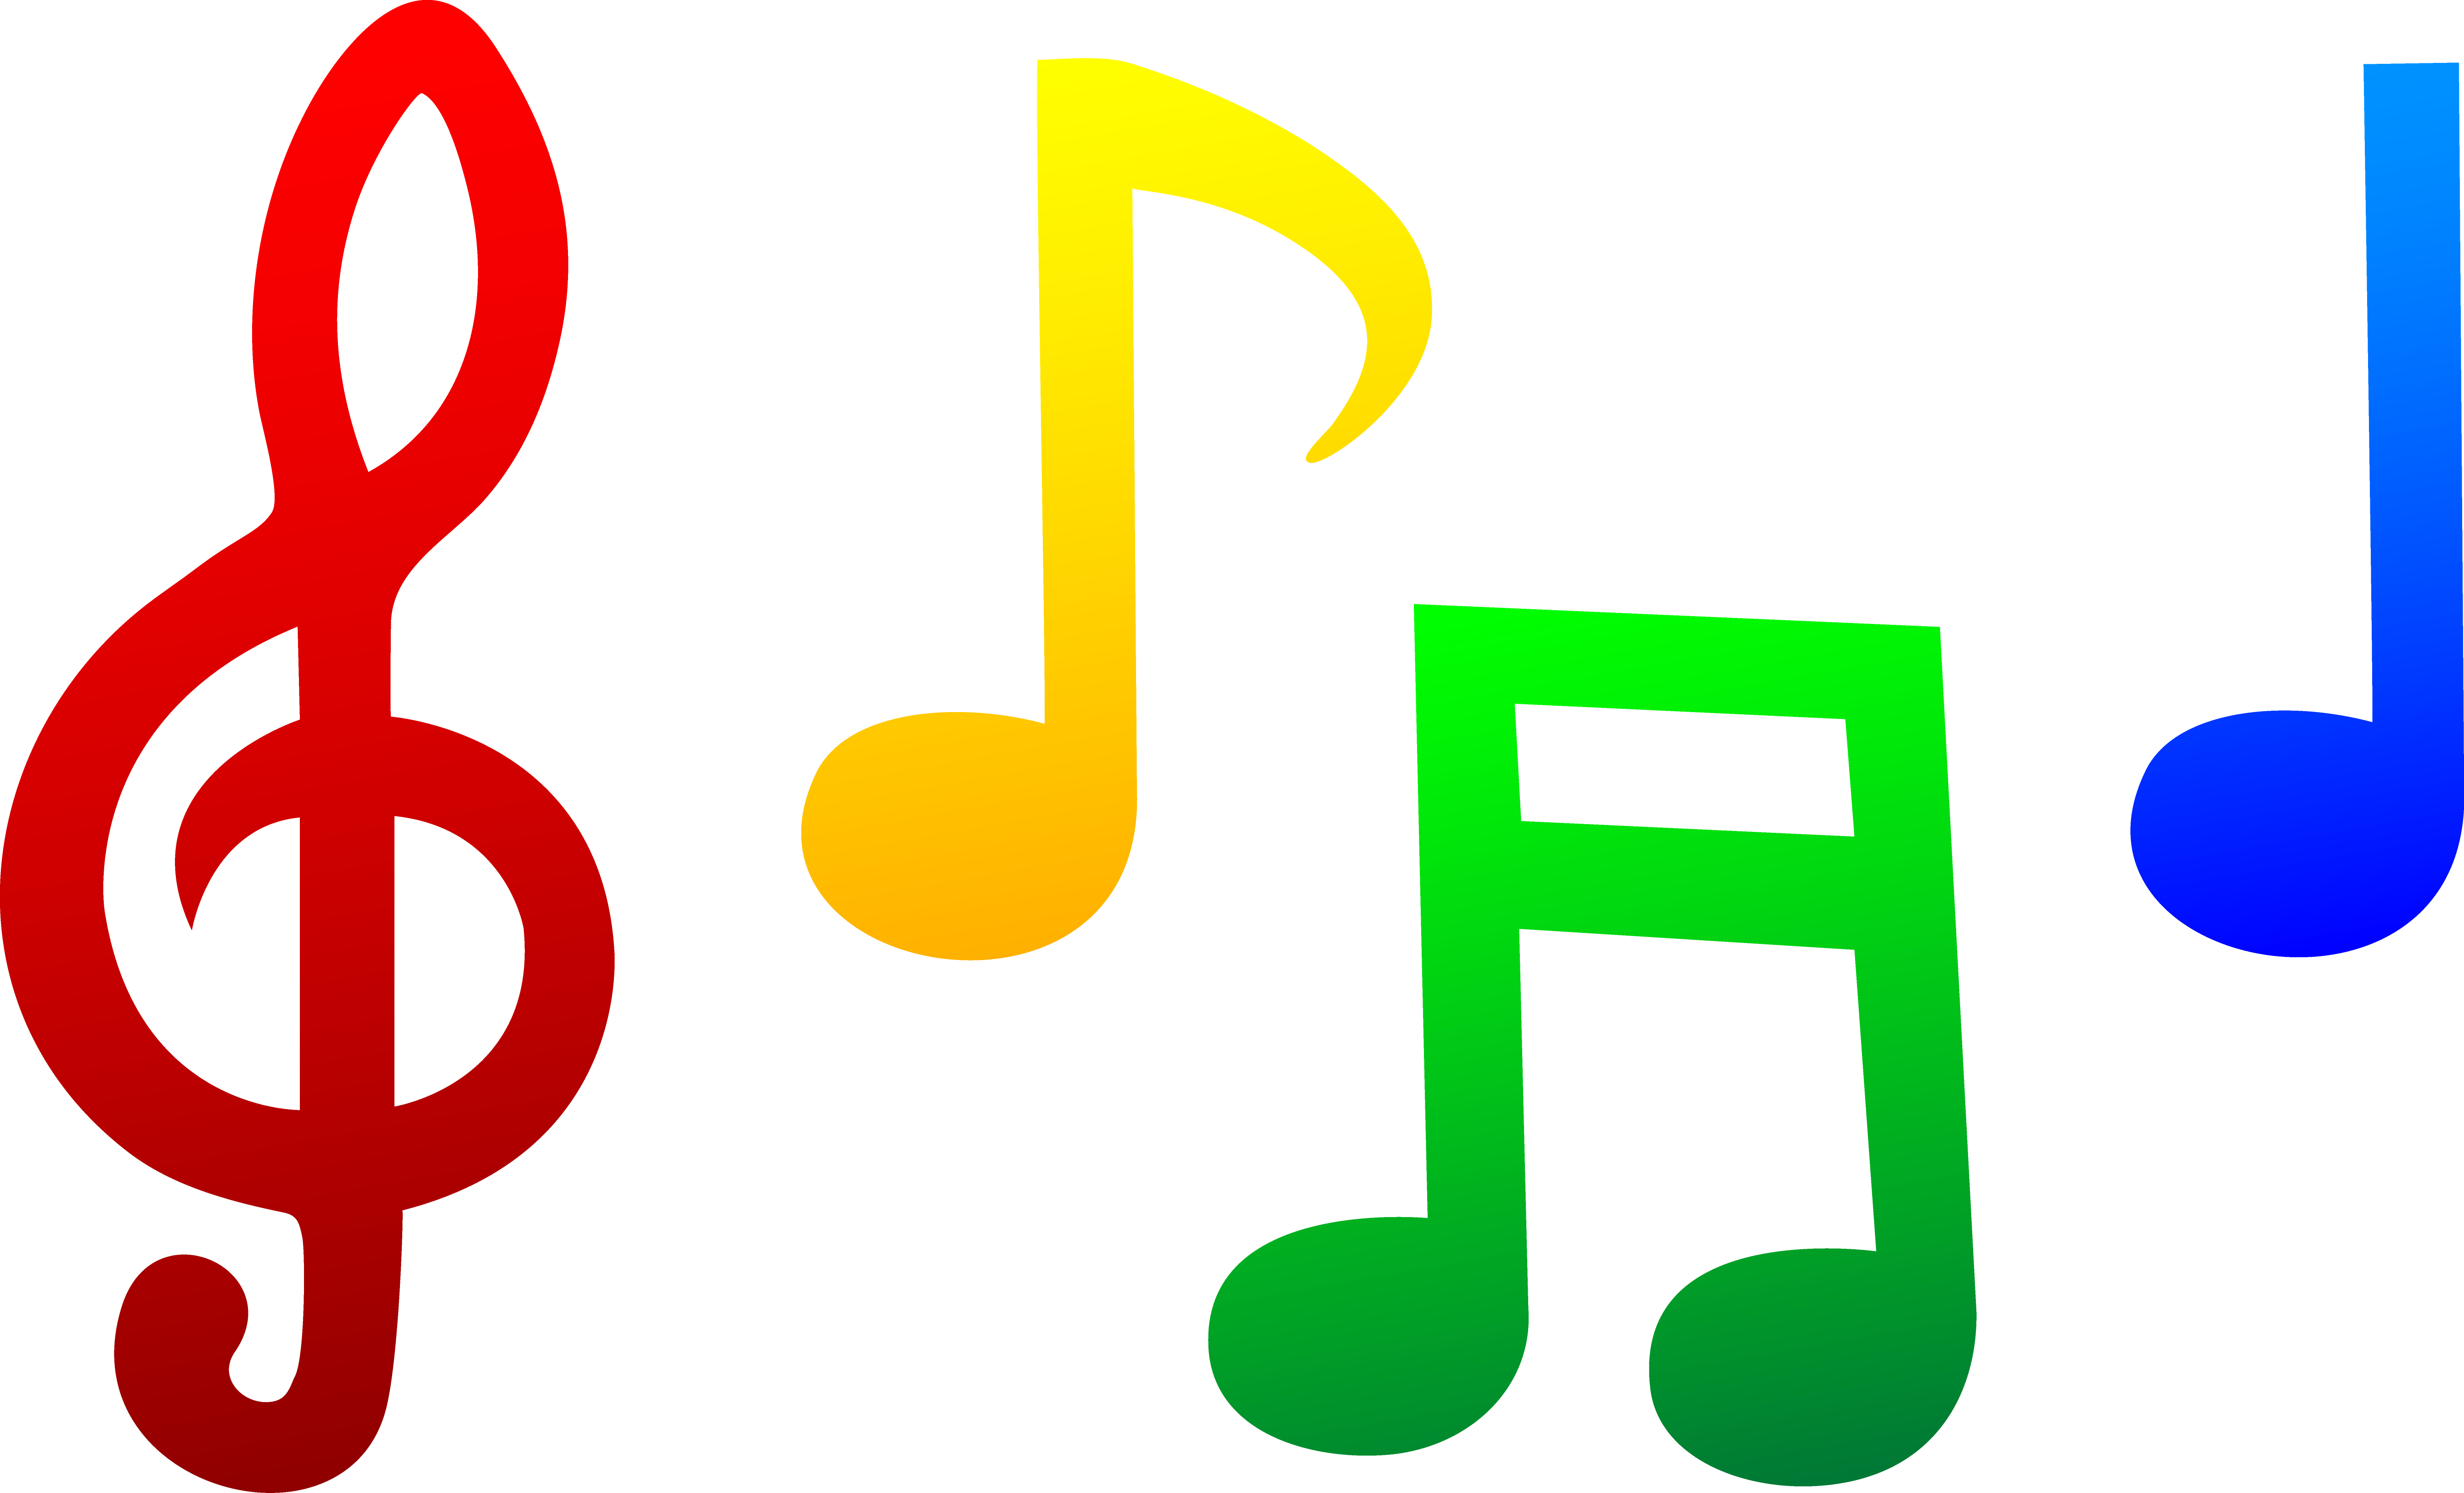 Free music notes at. E clipart colorful